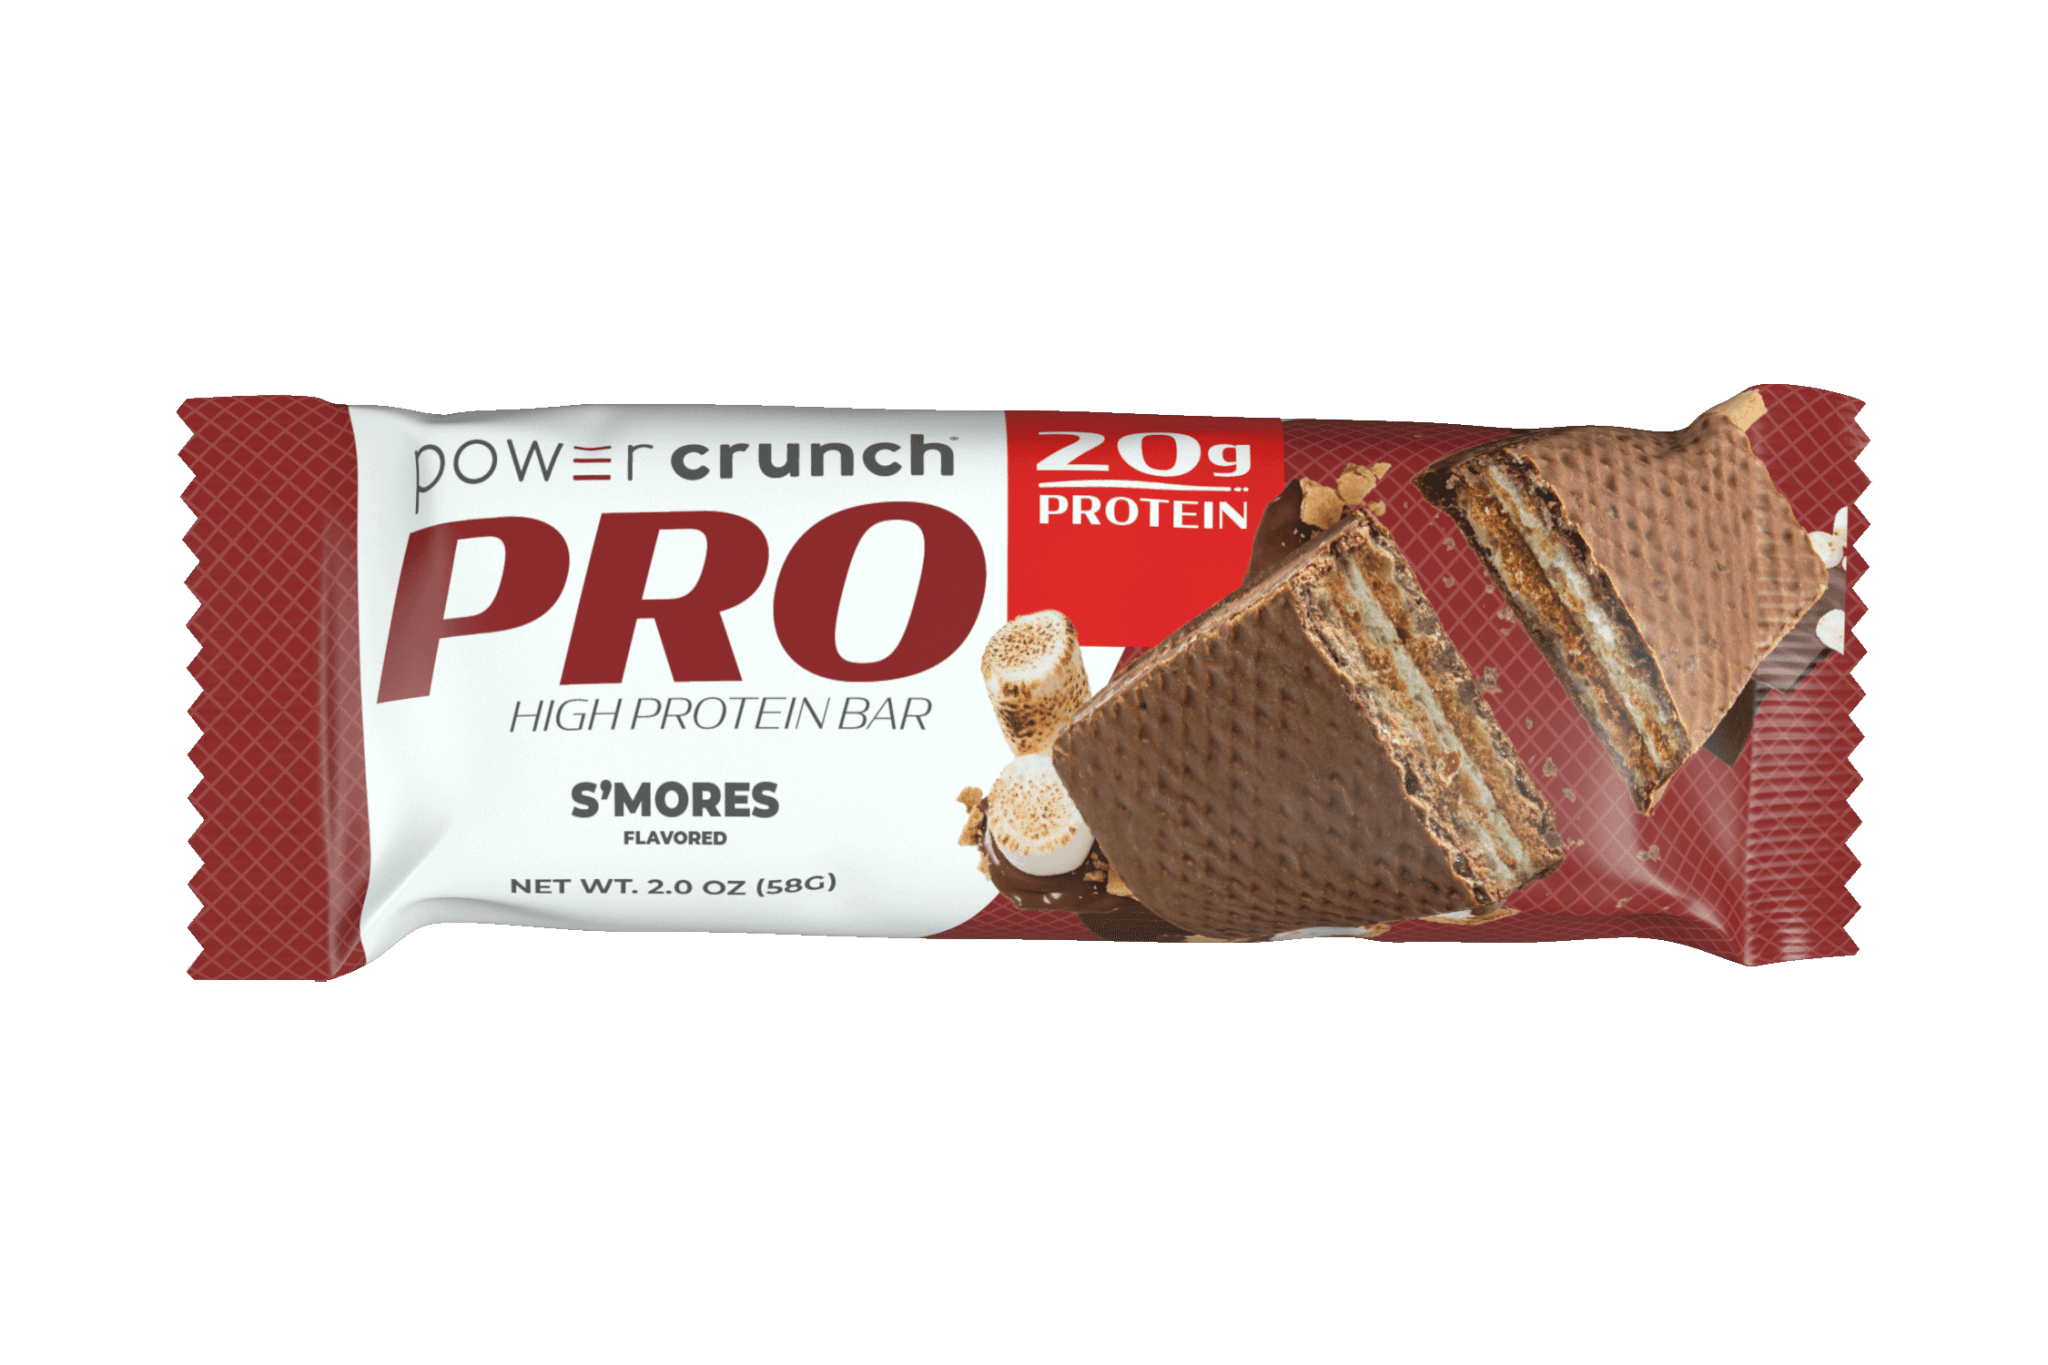 Power Crunch S'mores PRO 20g protein bars